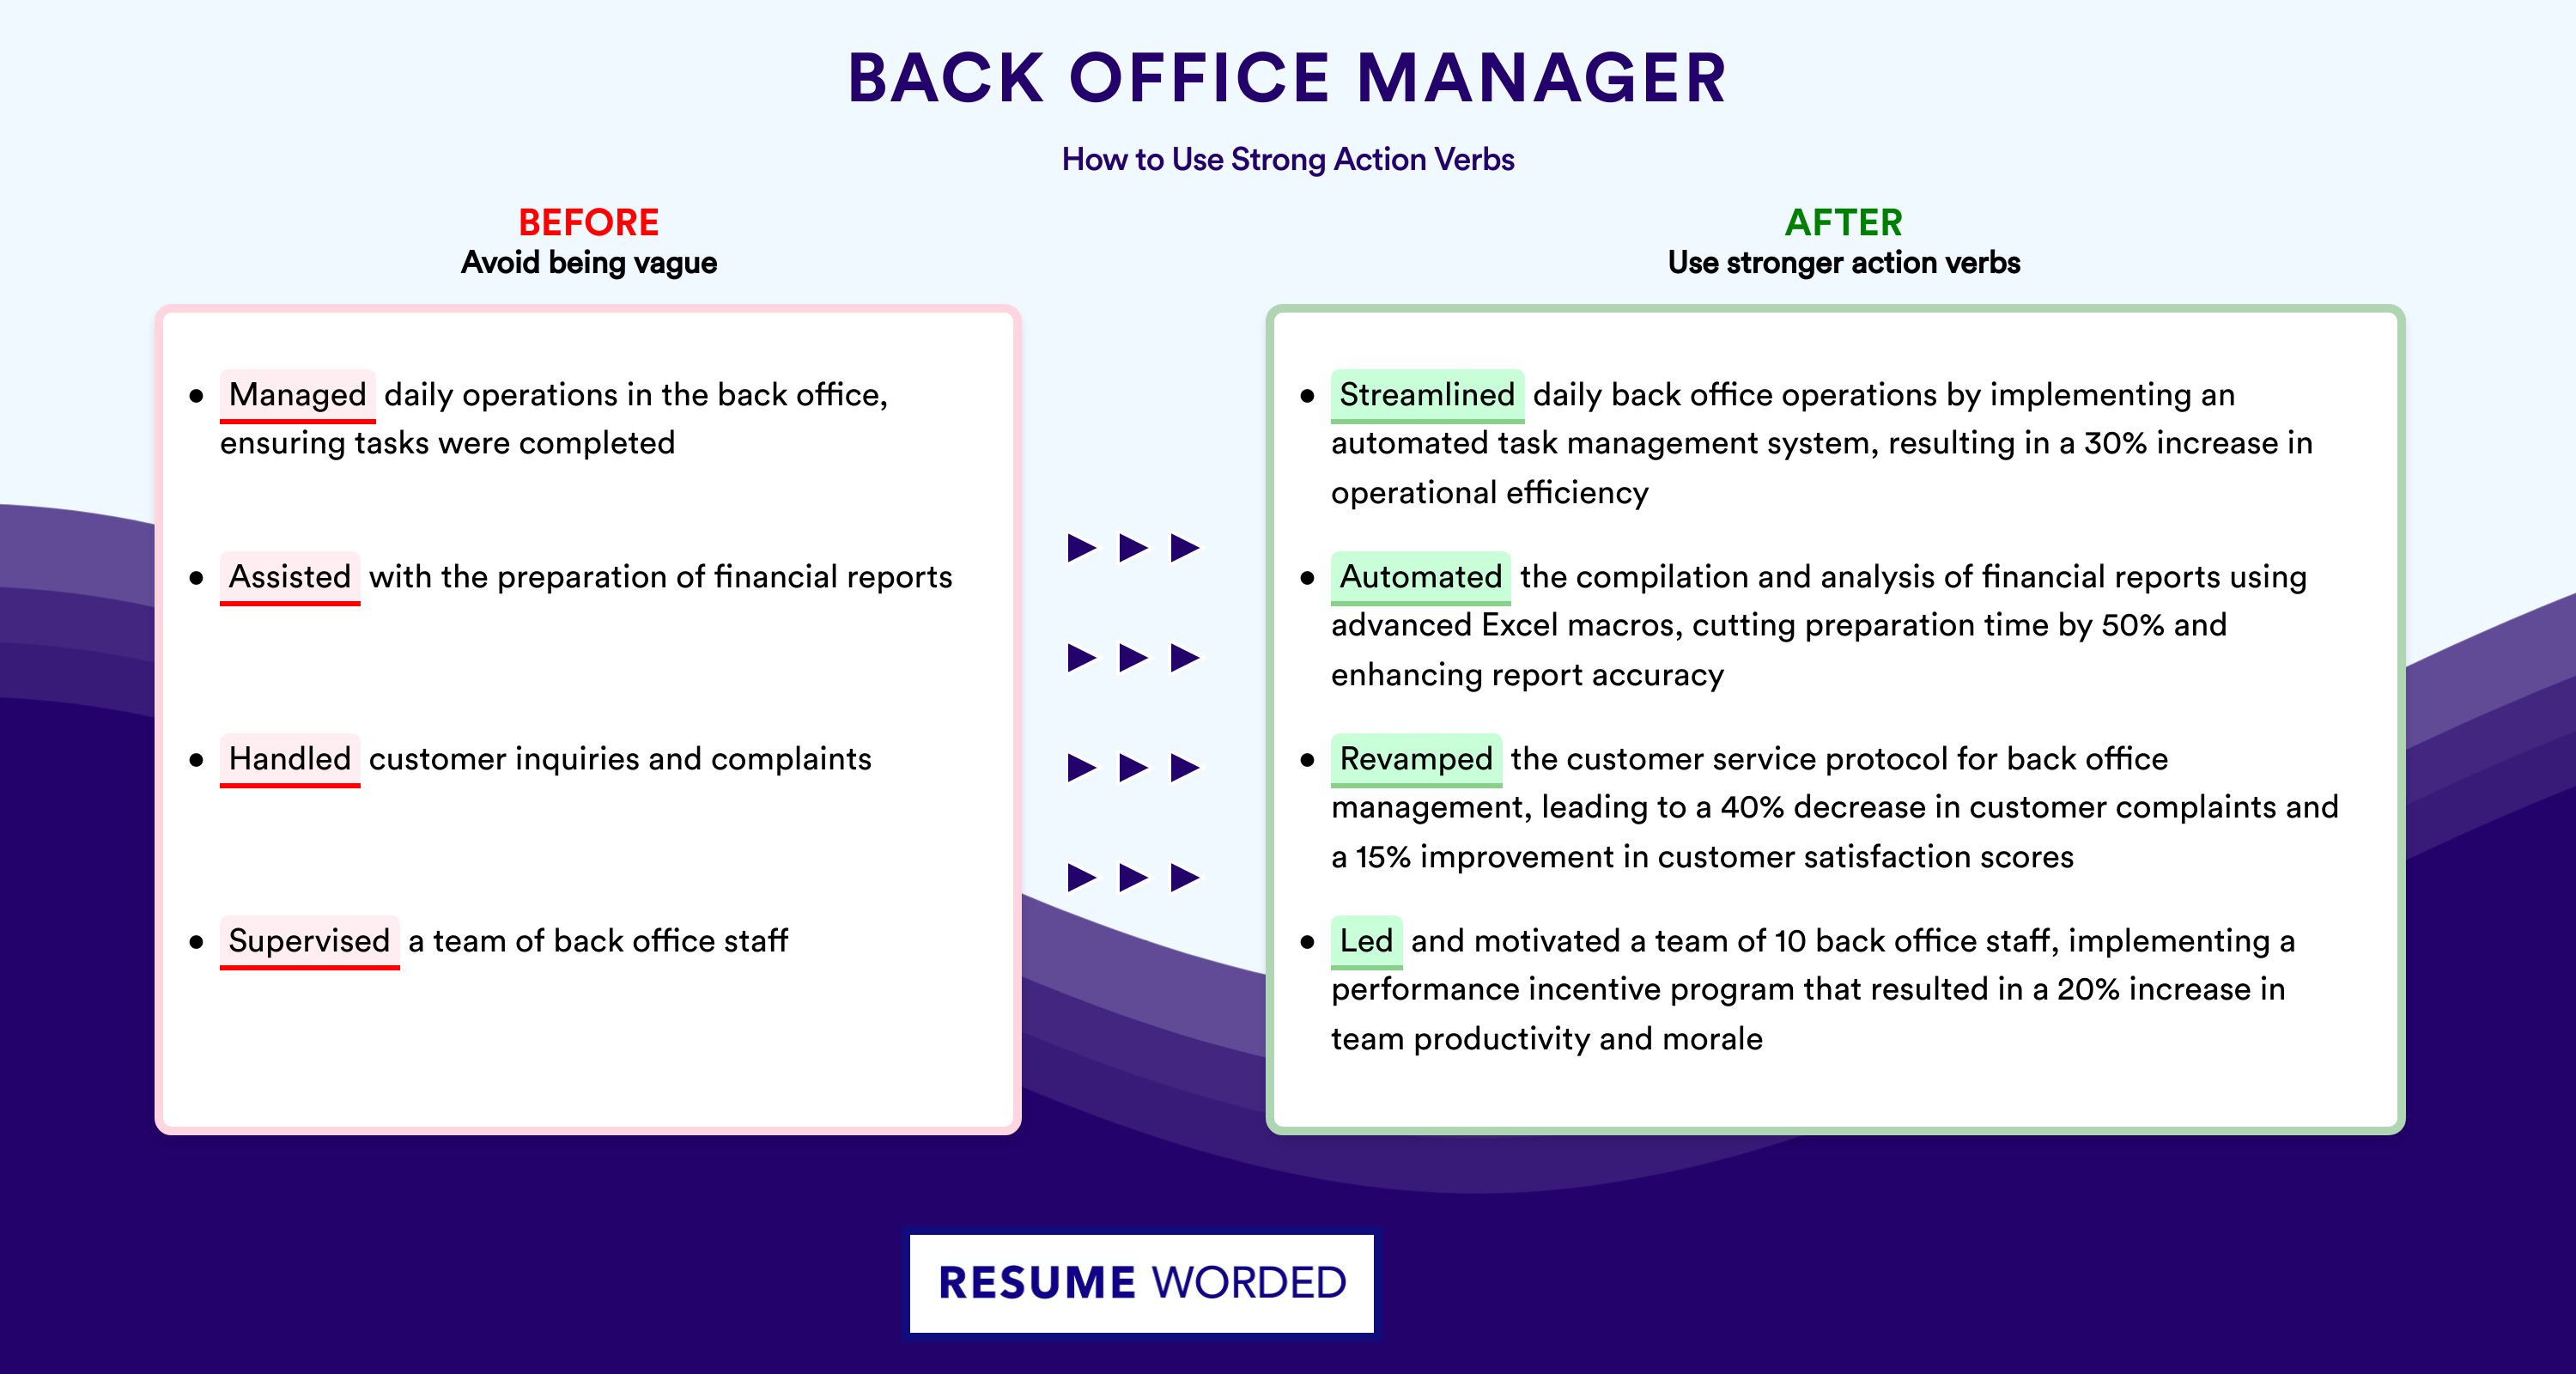 Action Verbs for Back Office Manager